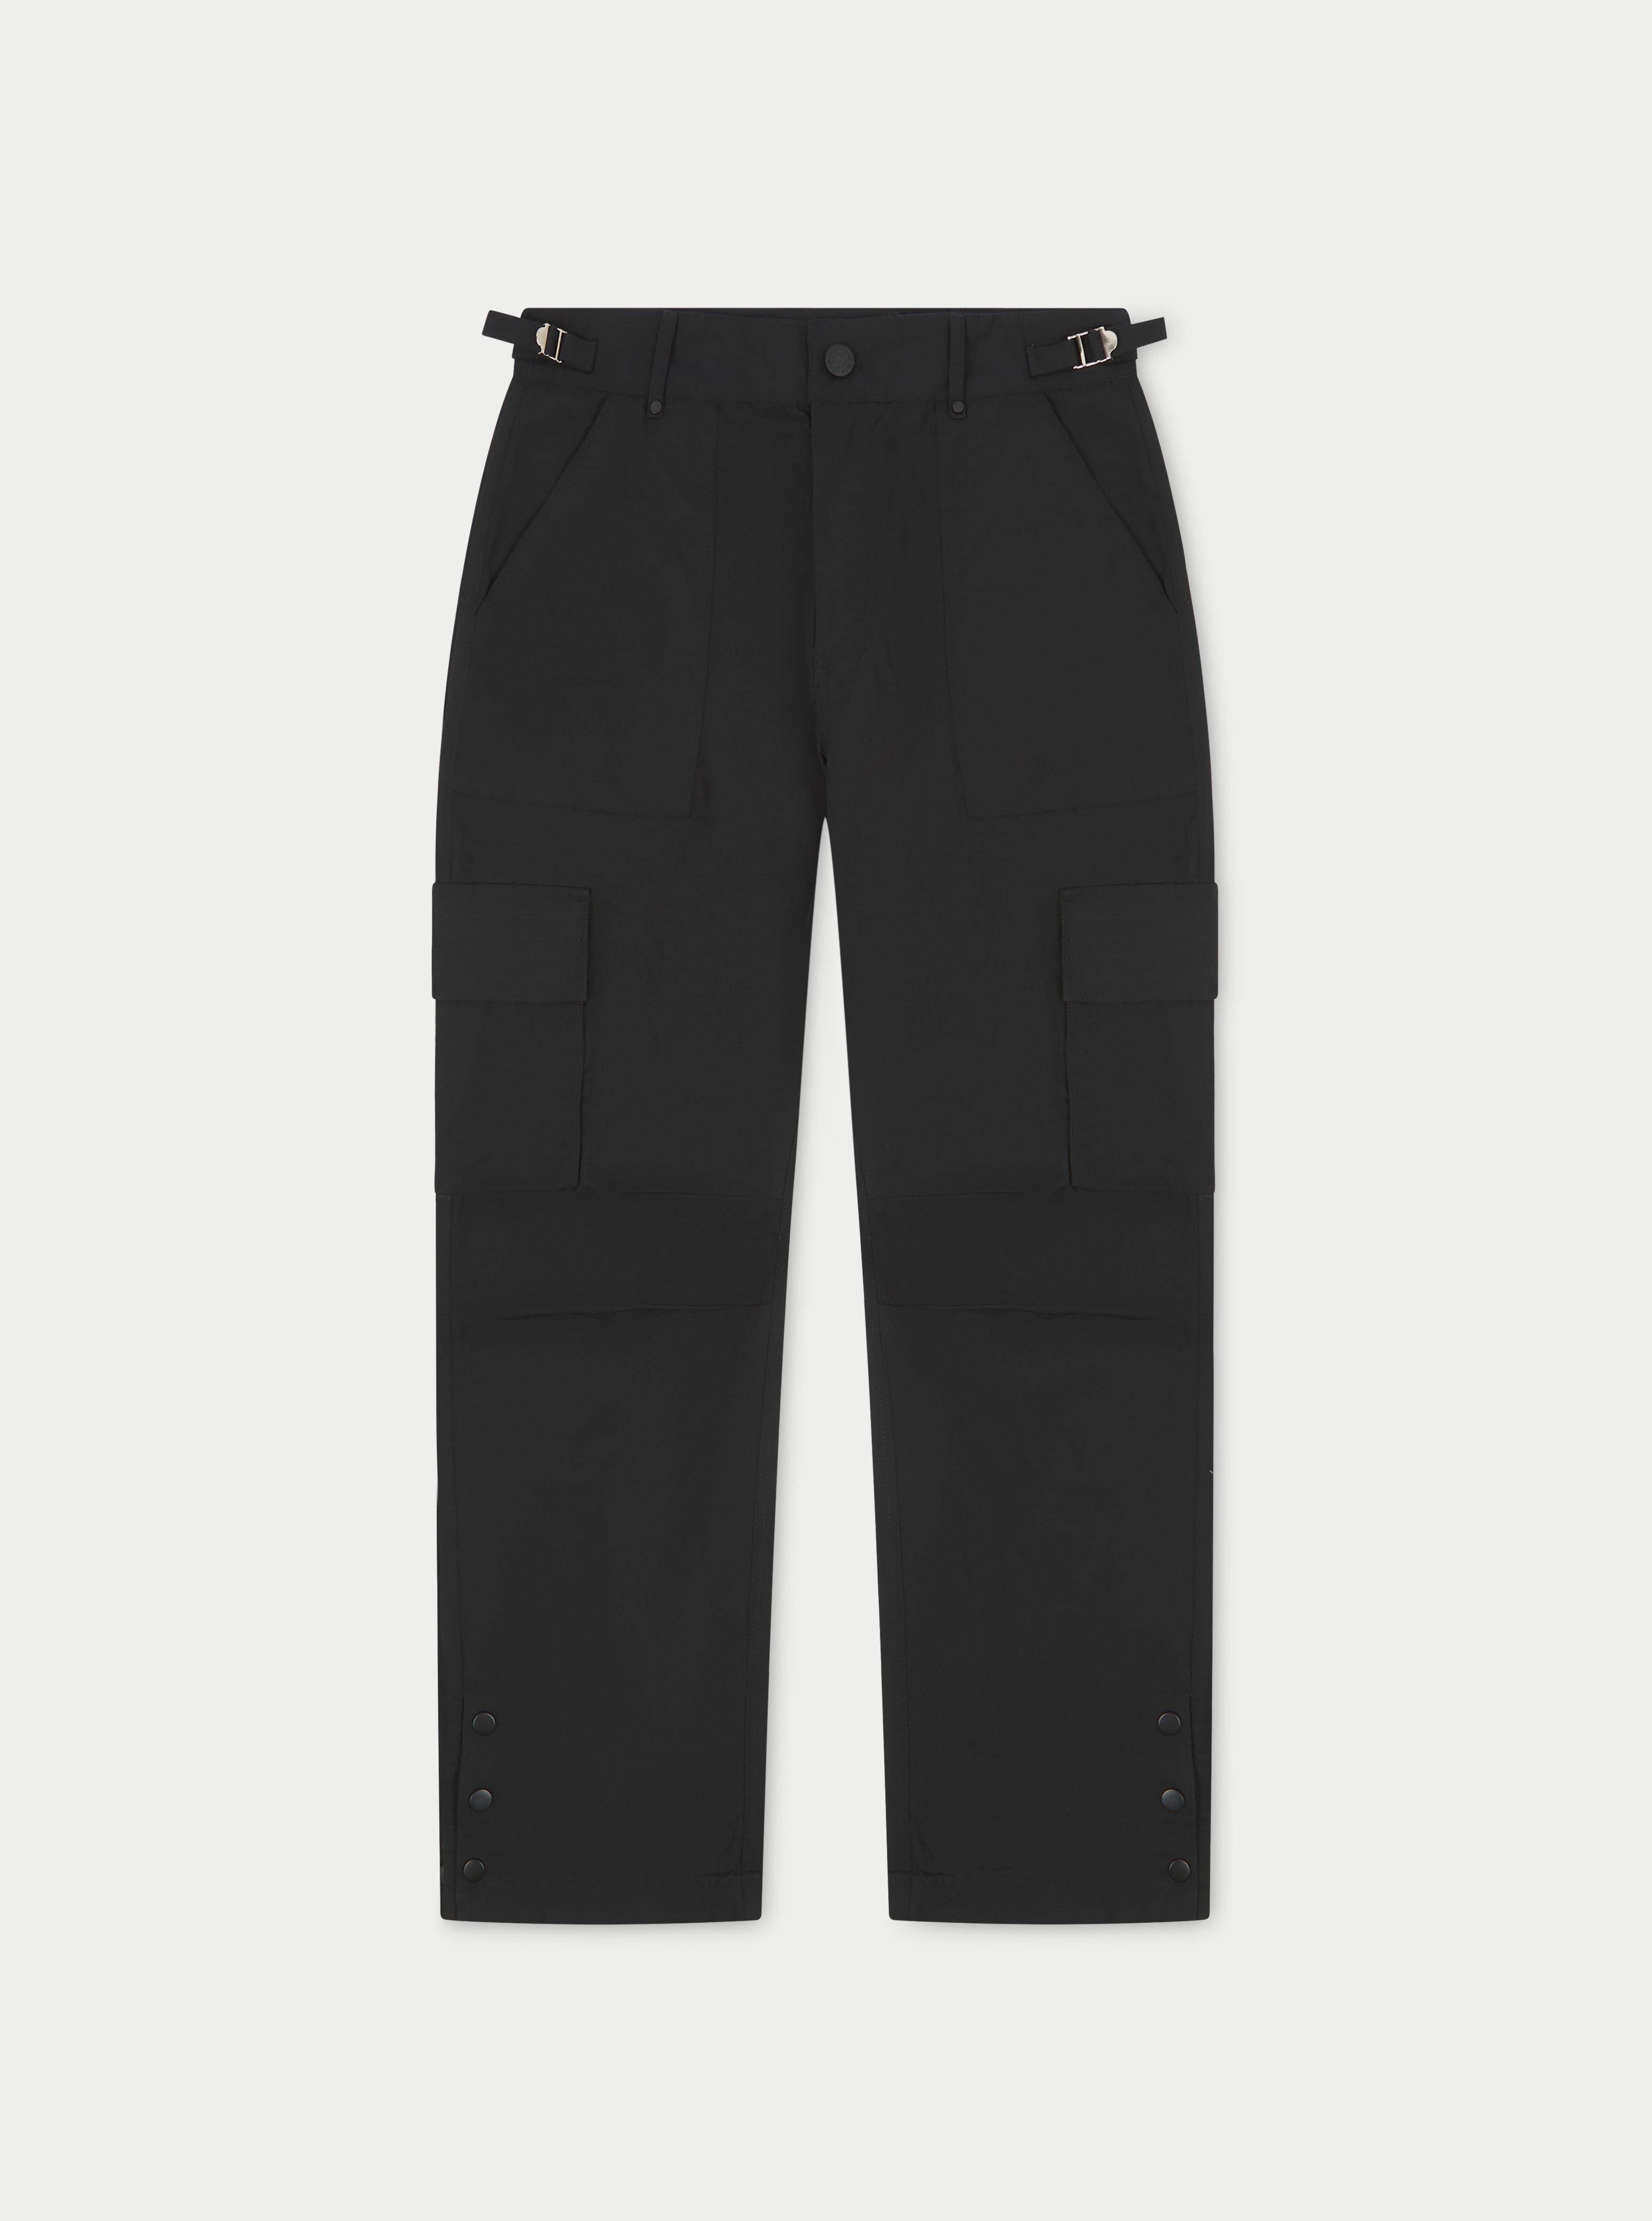 Relaxed Fit Cargo trousers - Black - Men | H&M IN